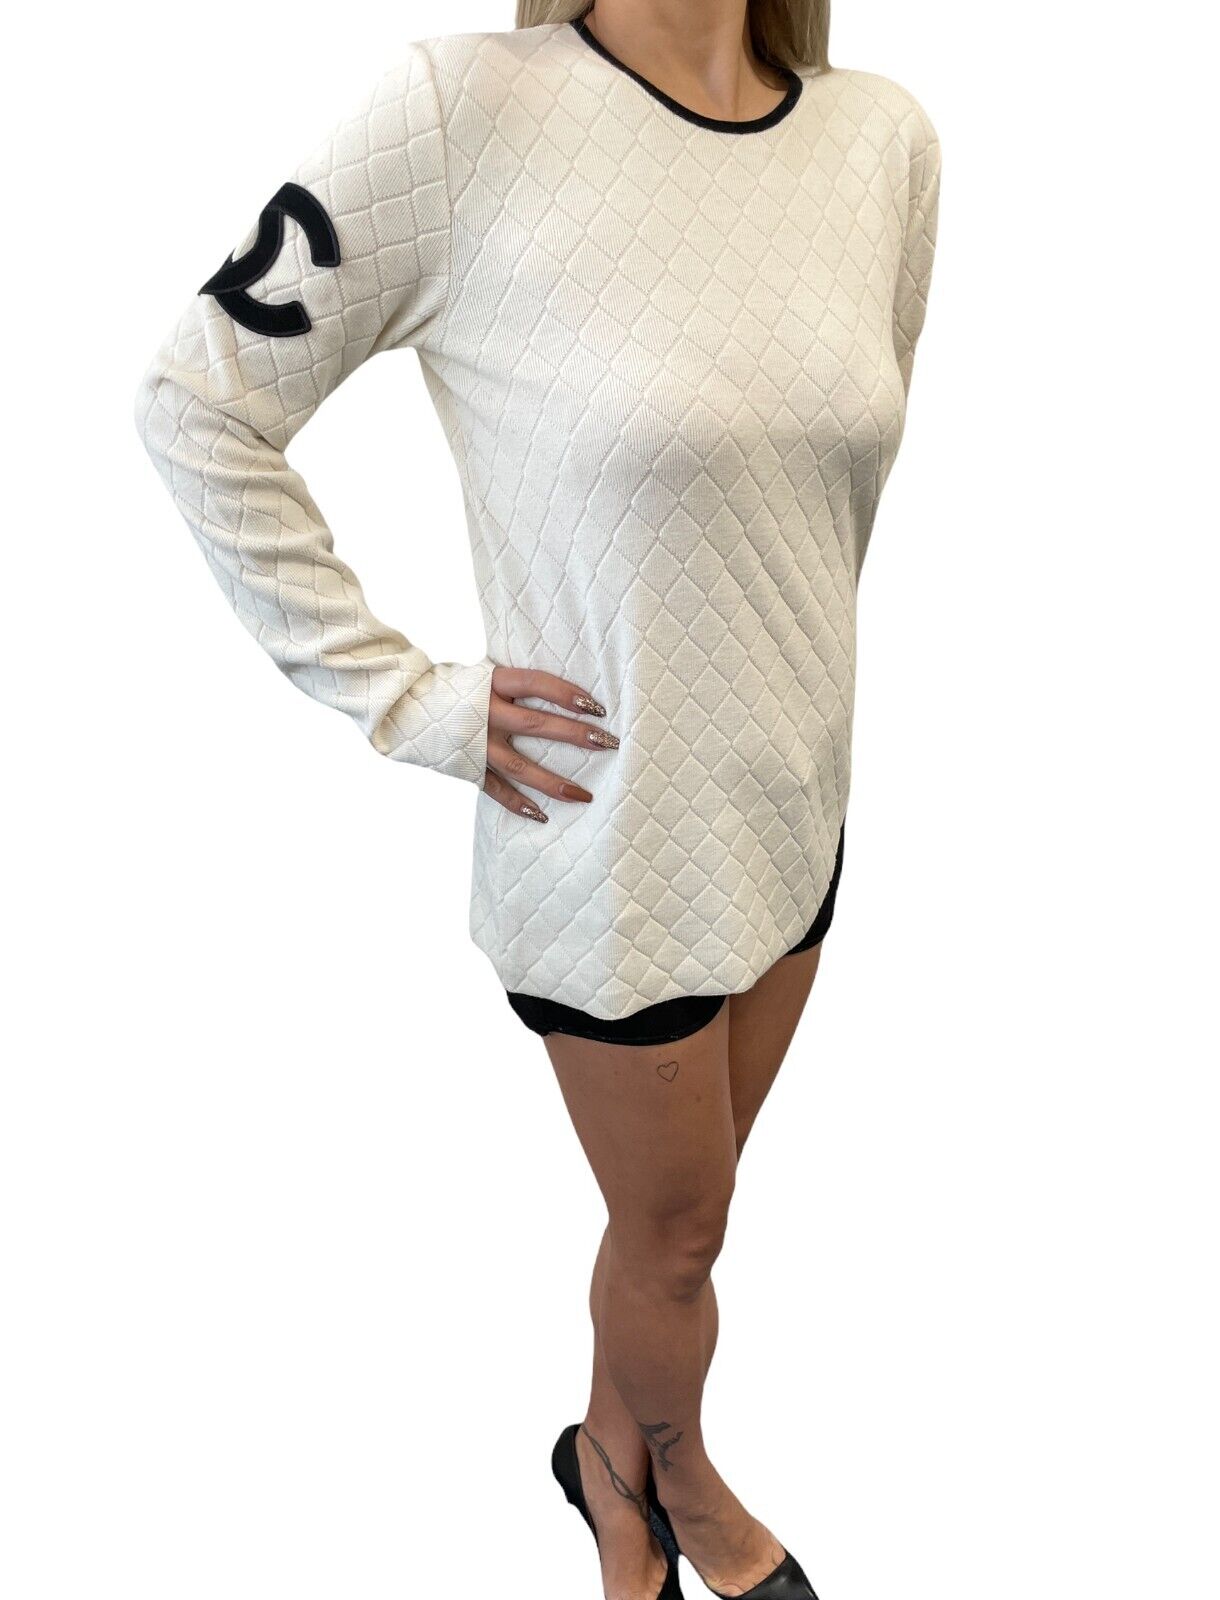 CHANEL Vintage 05A Cambon Line Knit Sweater #38 Top Coco Mark Ivory Rank AB